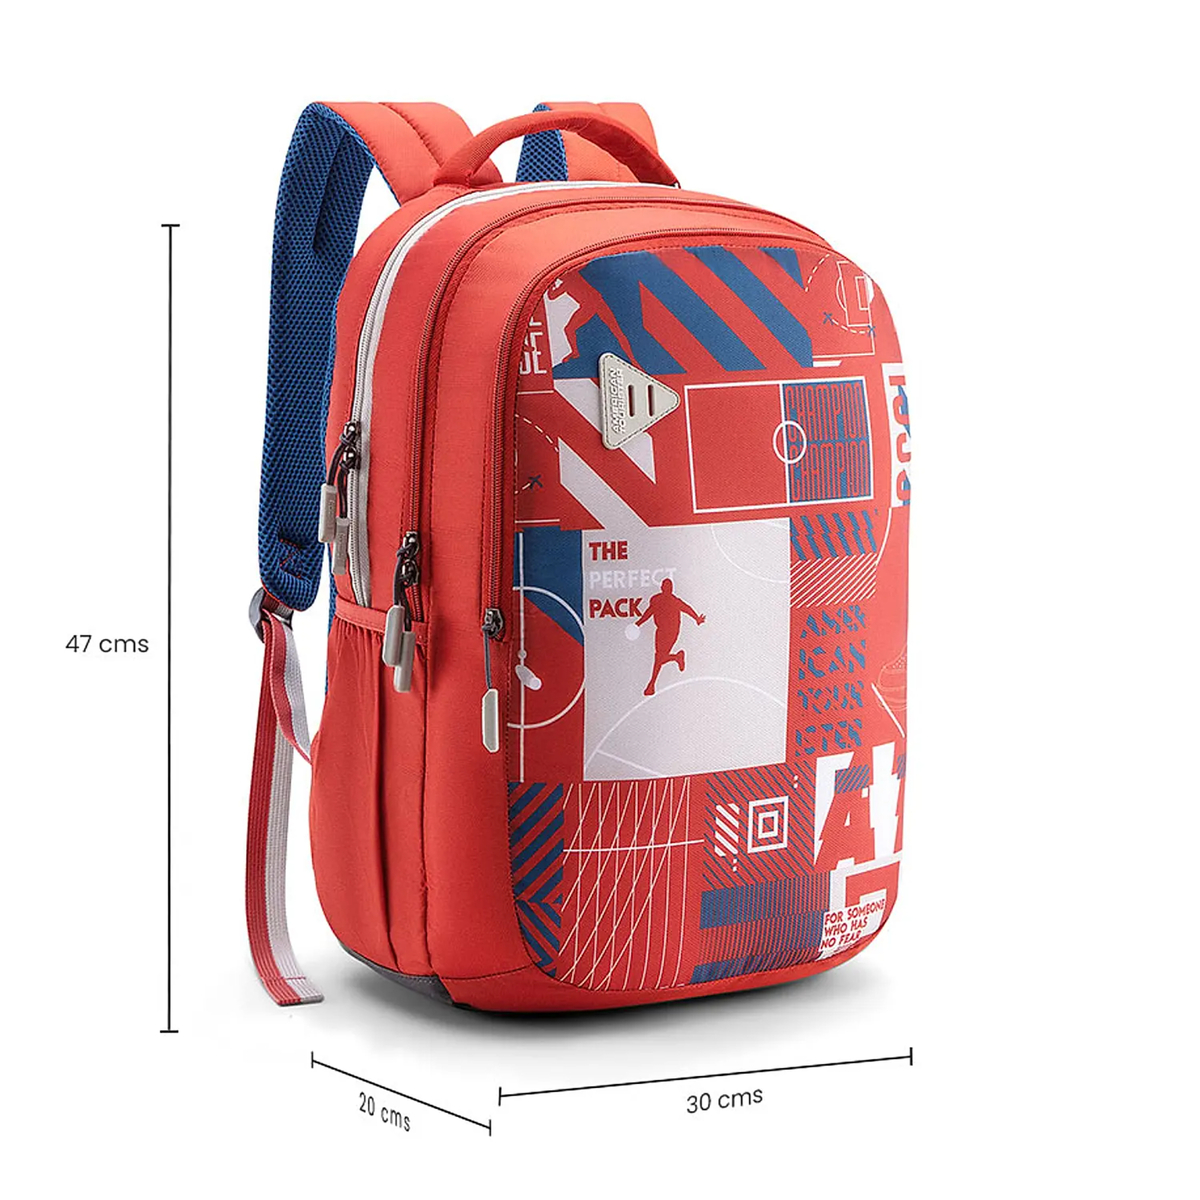 American Tourister Quad Back Pack 20102 19" Red